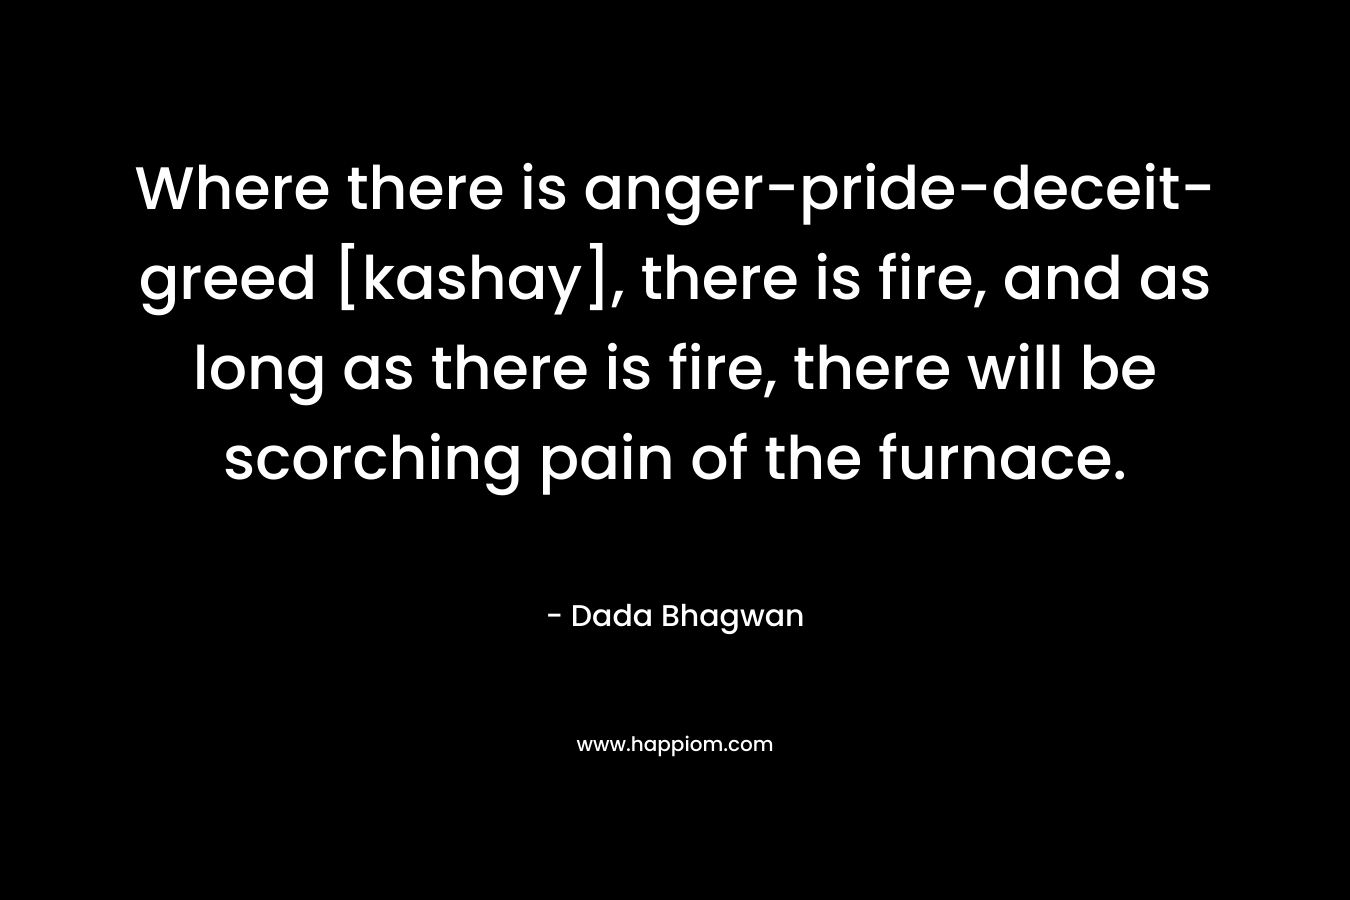 Where there is anger-pride-deceit-greed [kashay], there is fire, and as long as there is fire, there will be scorching pain of the furnace.